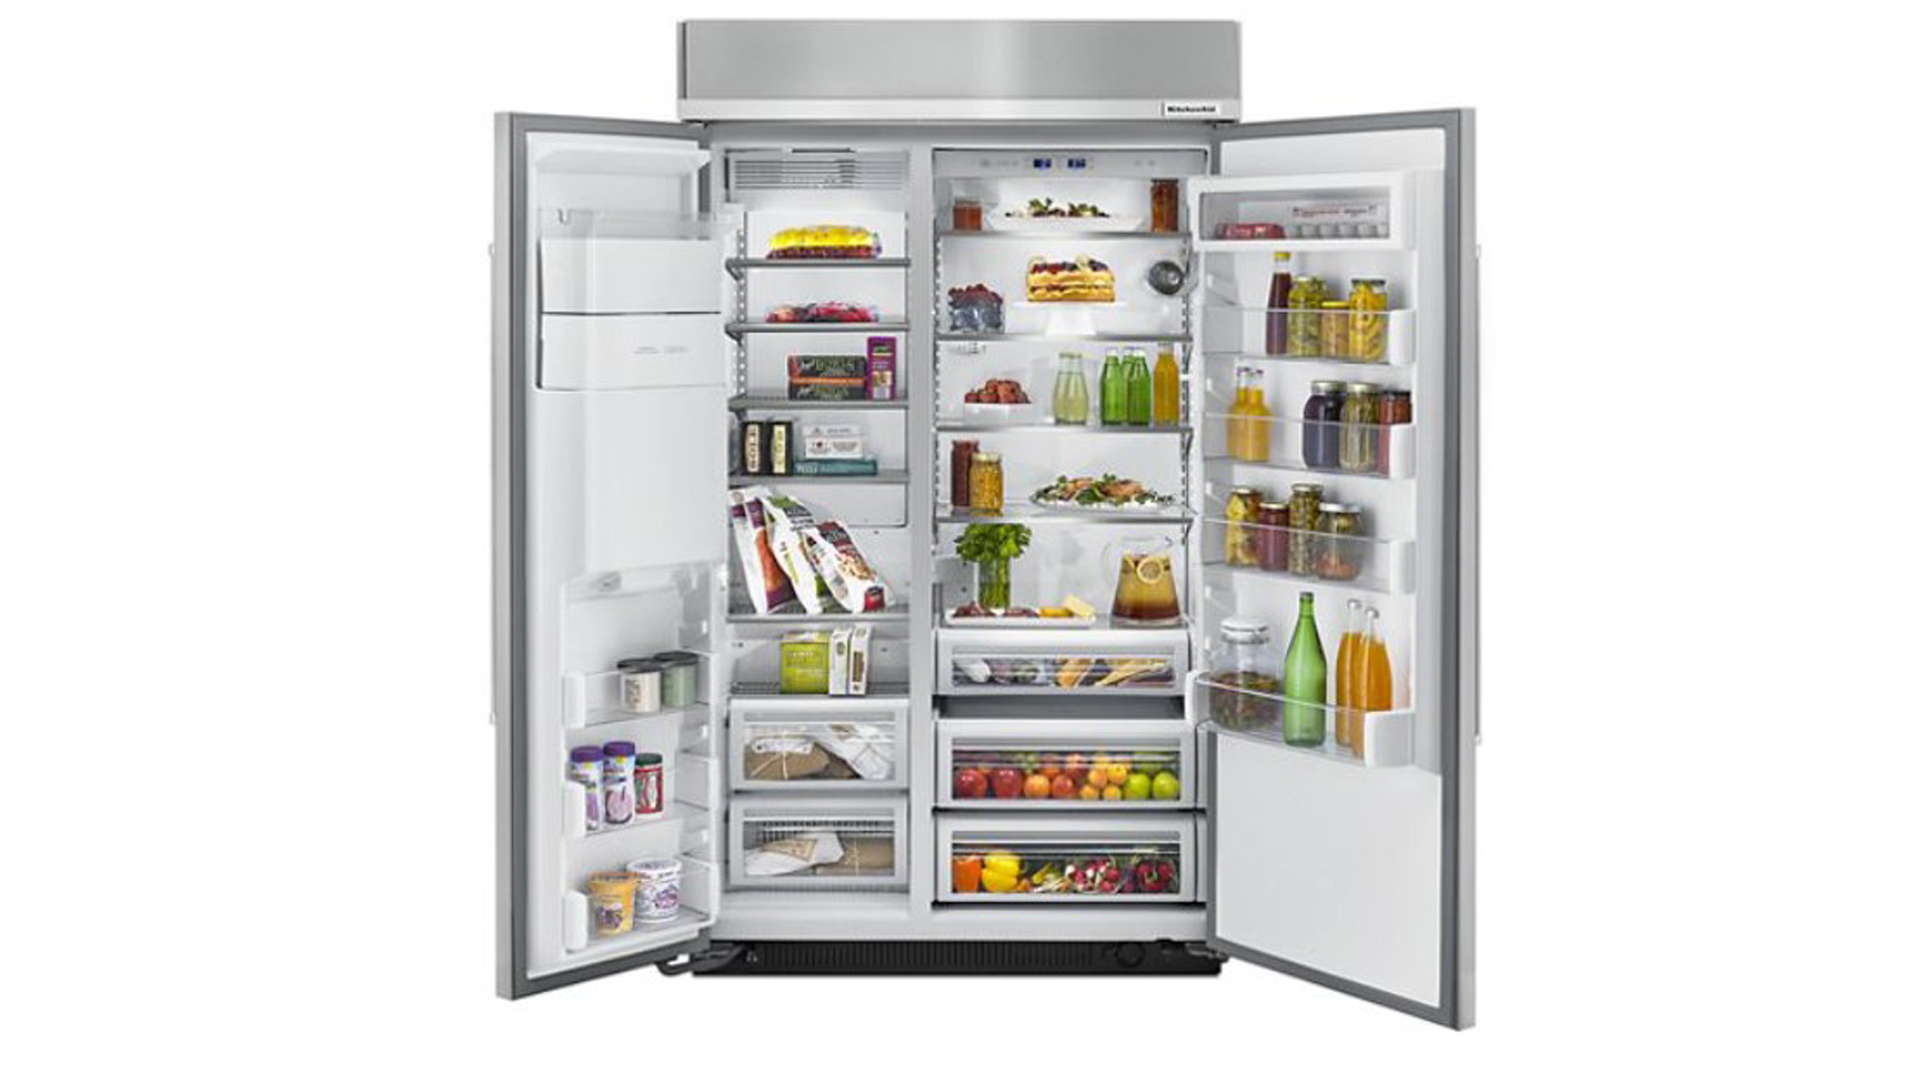 KitchenAid KBSD608ESS review: image of open fridge with groceries